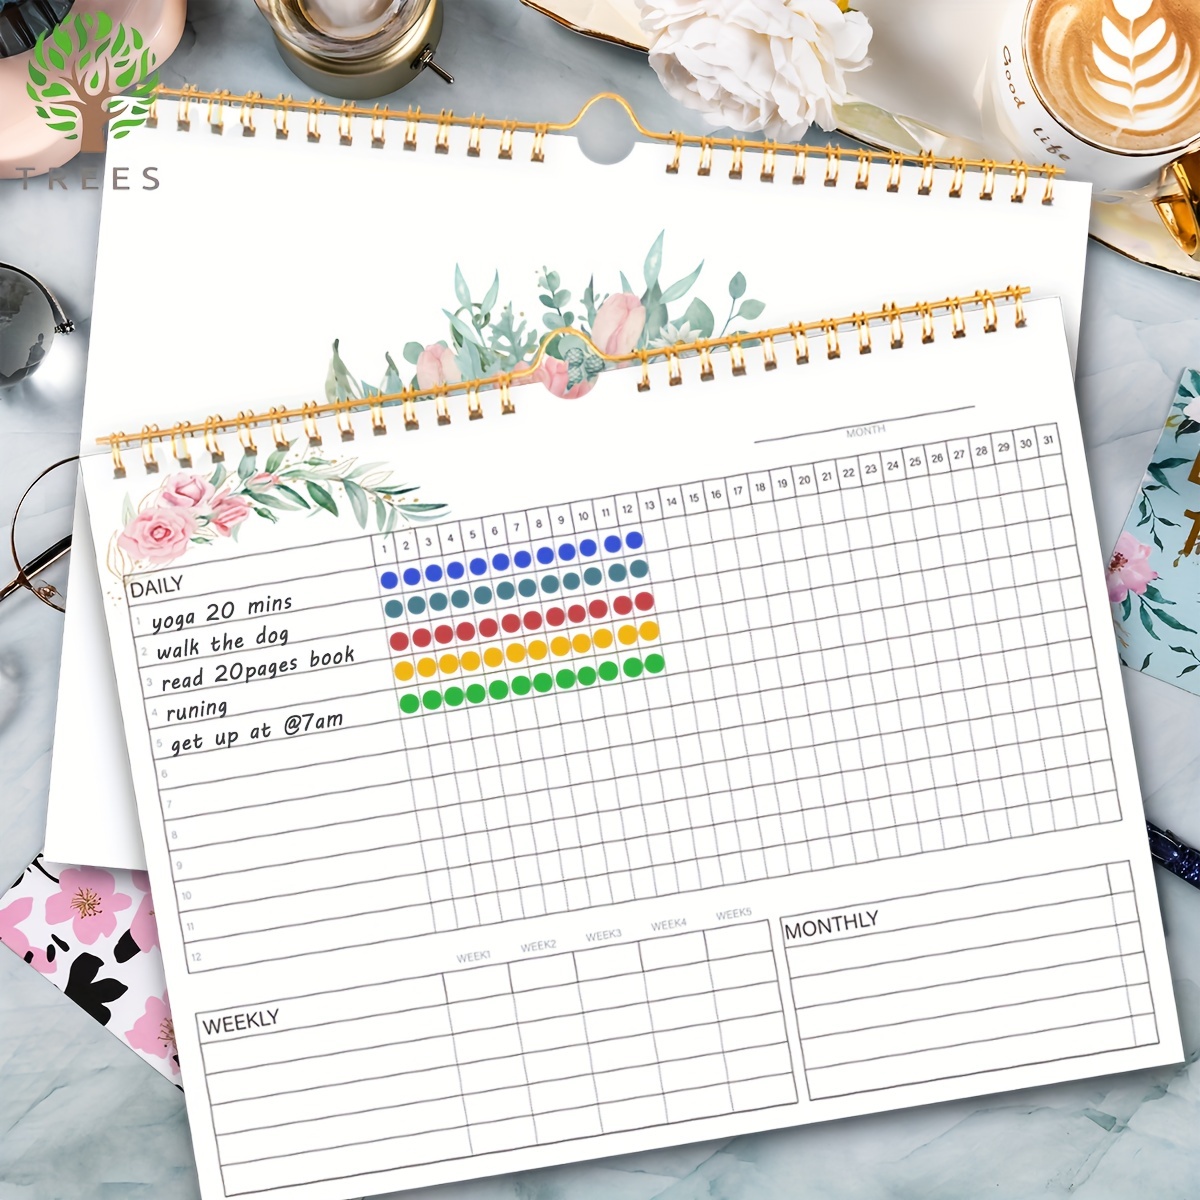 Habit Tracker Calendar- 12 Months Undated Daily Weekly & Monthly Period  Habit Tracker Journal, Greenery Floral, Spiral Binding with Writable Goals